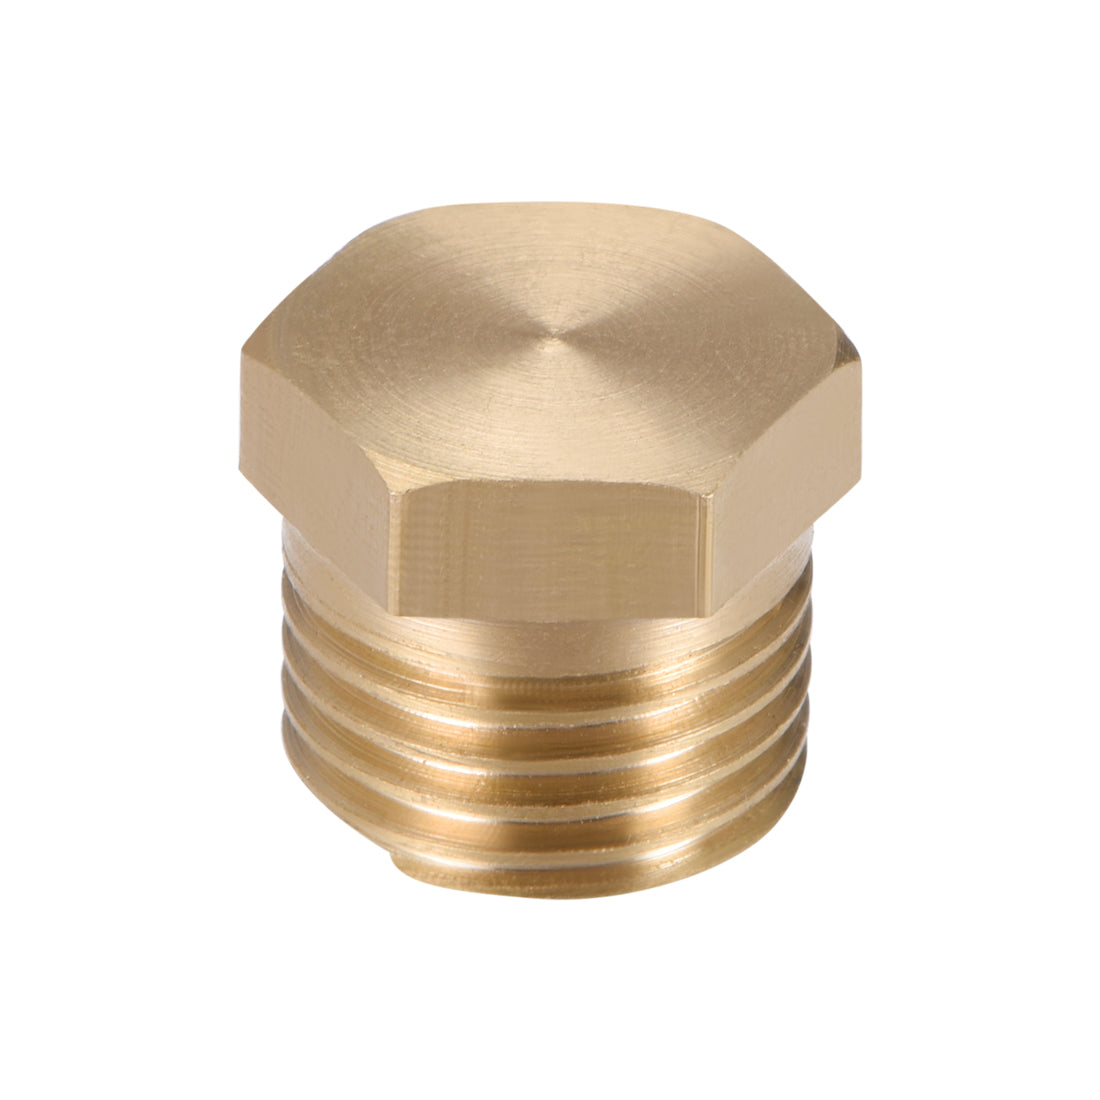 Uxcell Uxcell Brass Pipe Fitting, Cored Hex Head Plug 1/8"G Male Thread Connector Coupling Adapter 4pcs